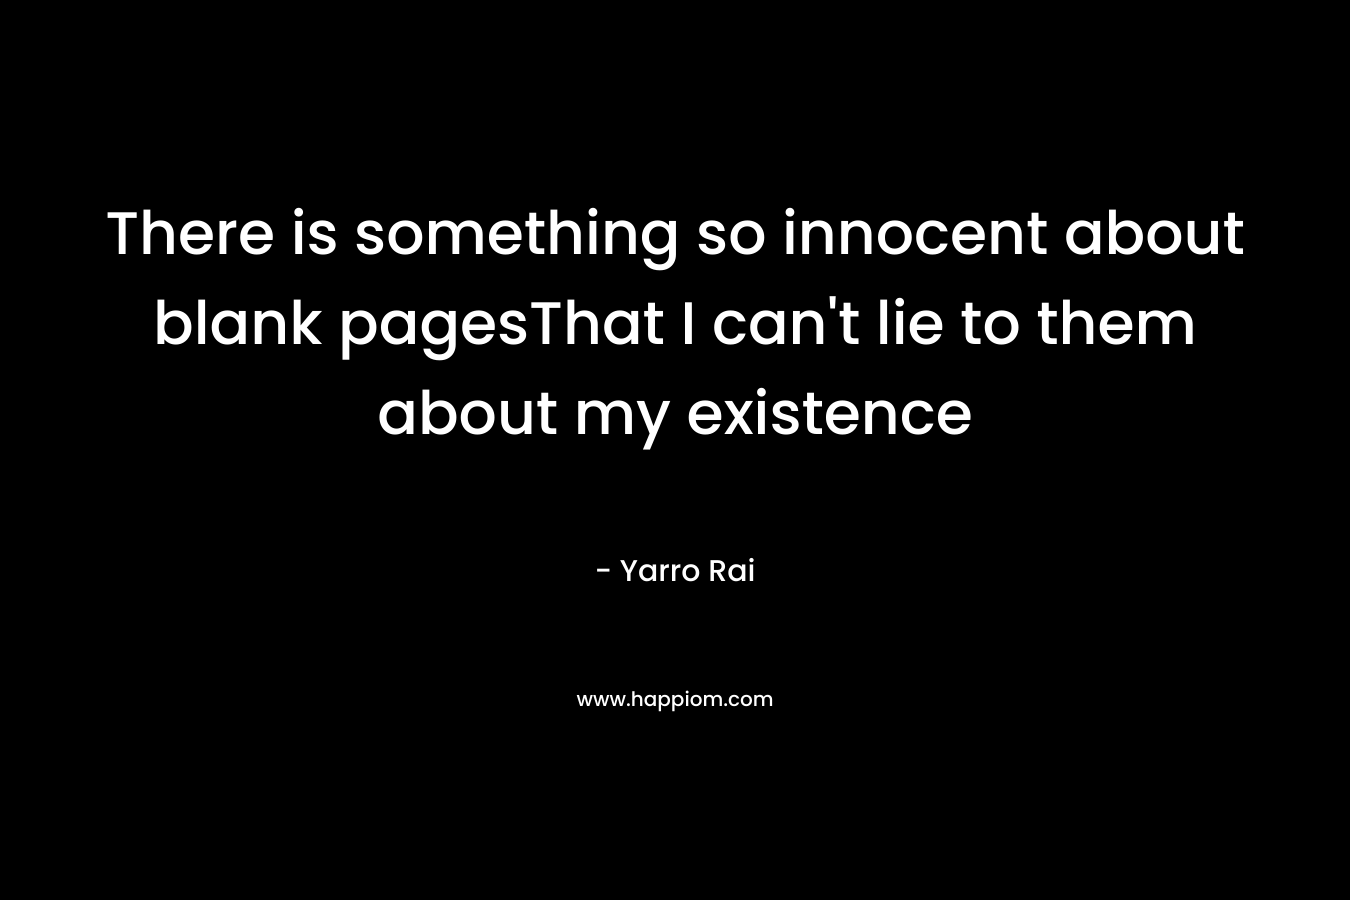 There is something so innocent about blank pagesThat I can’t lie to them about my existence – Yarro Rai